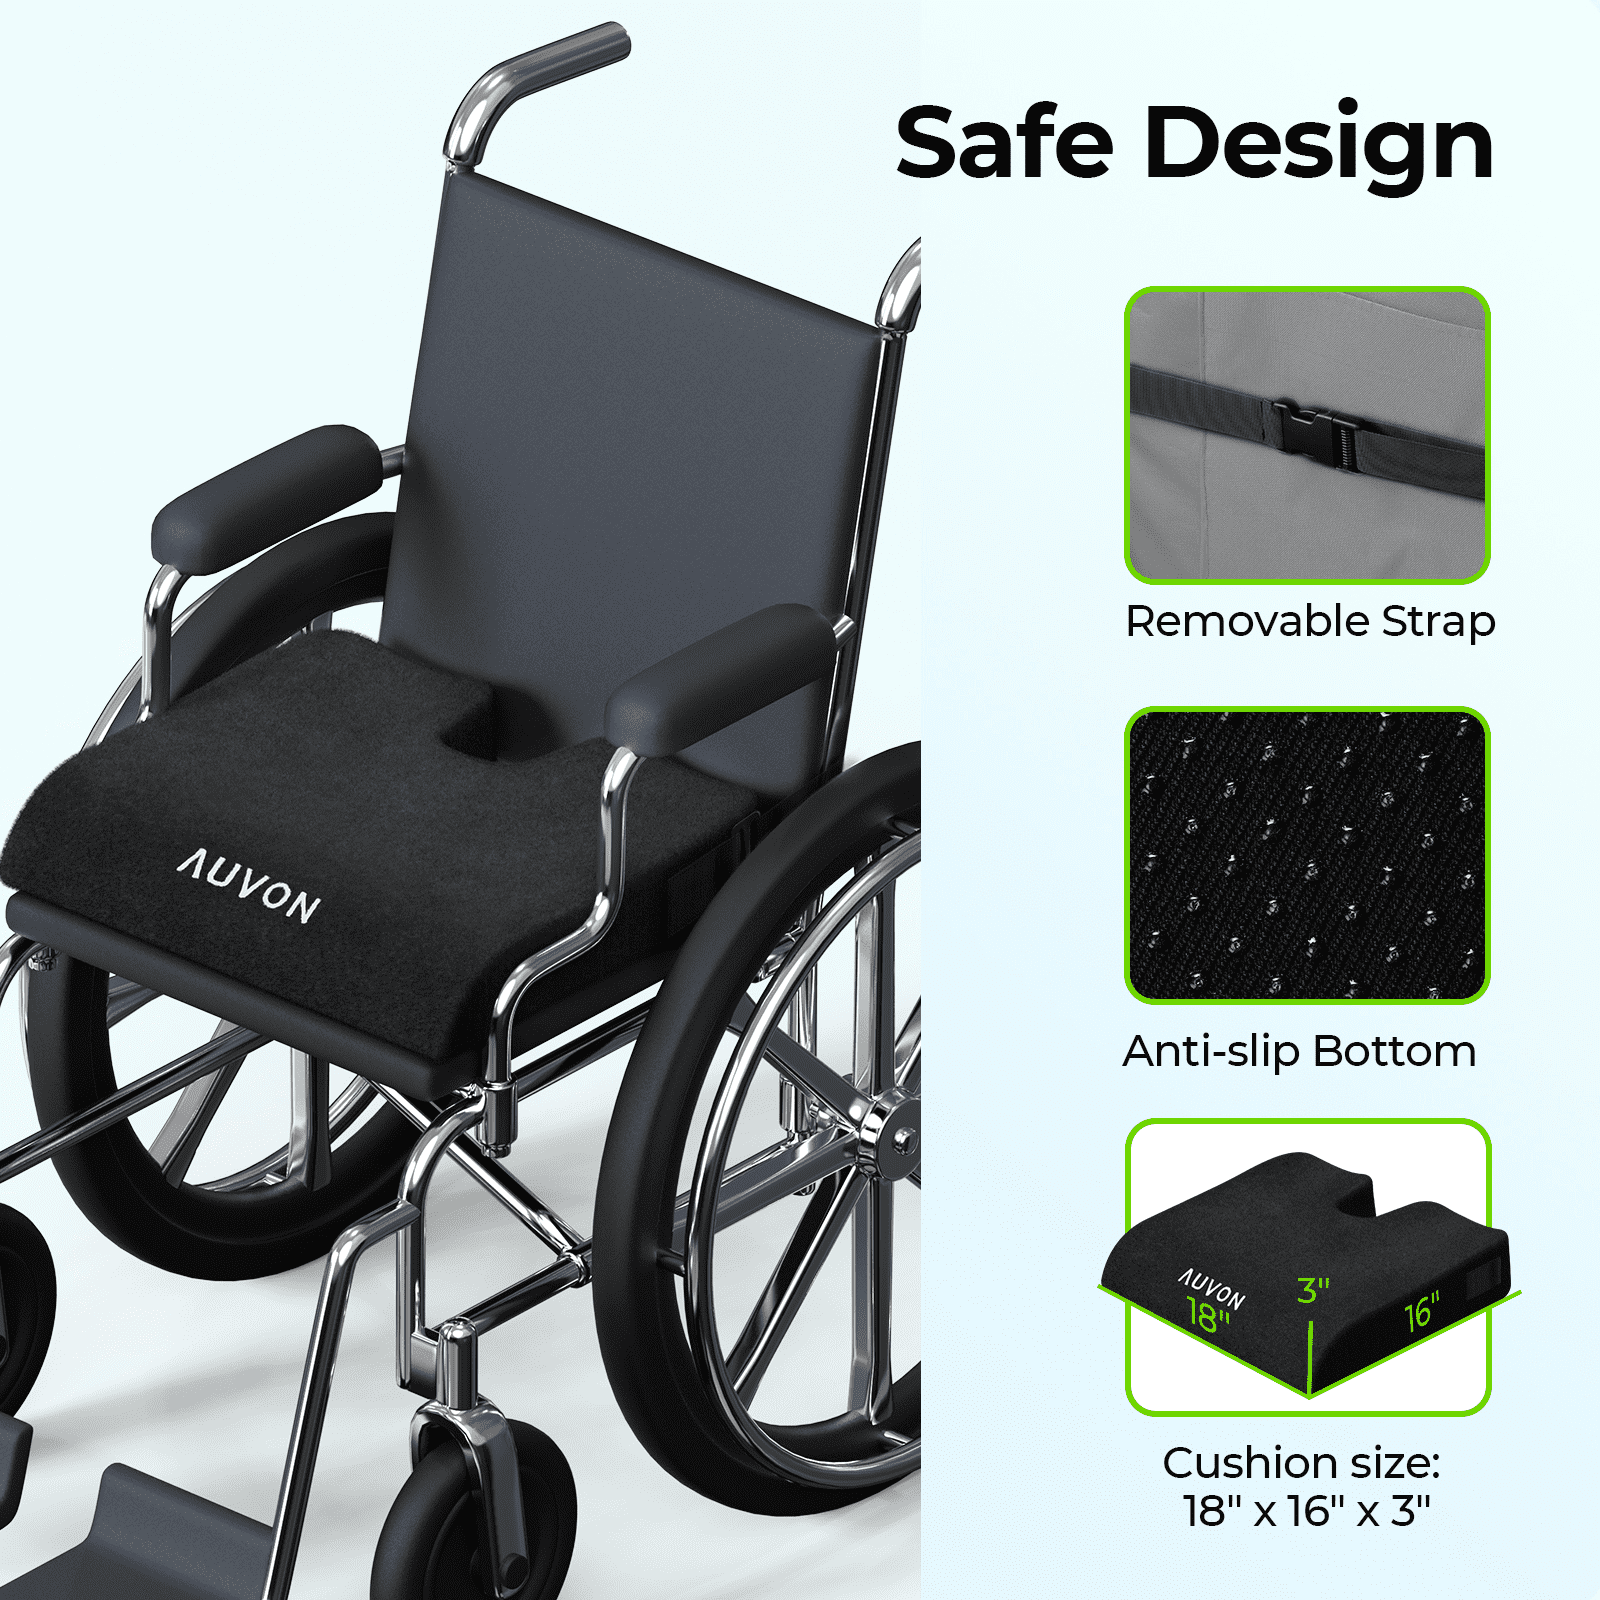 AUVON Gel Wheelchair Seat Cushion with Non-Slip Cover, Removable Strap,  Waterproof Fabric for Summer